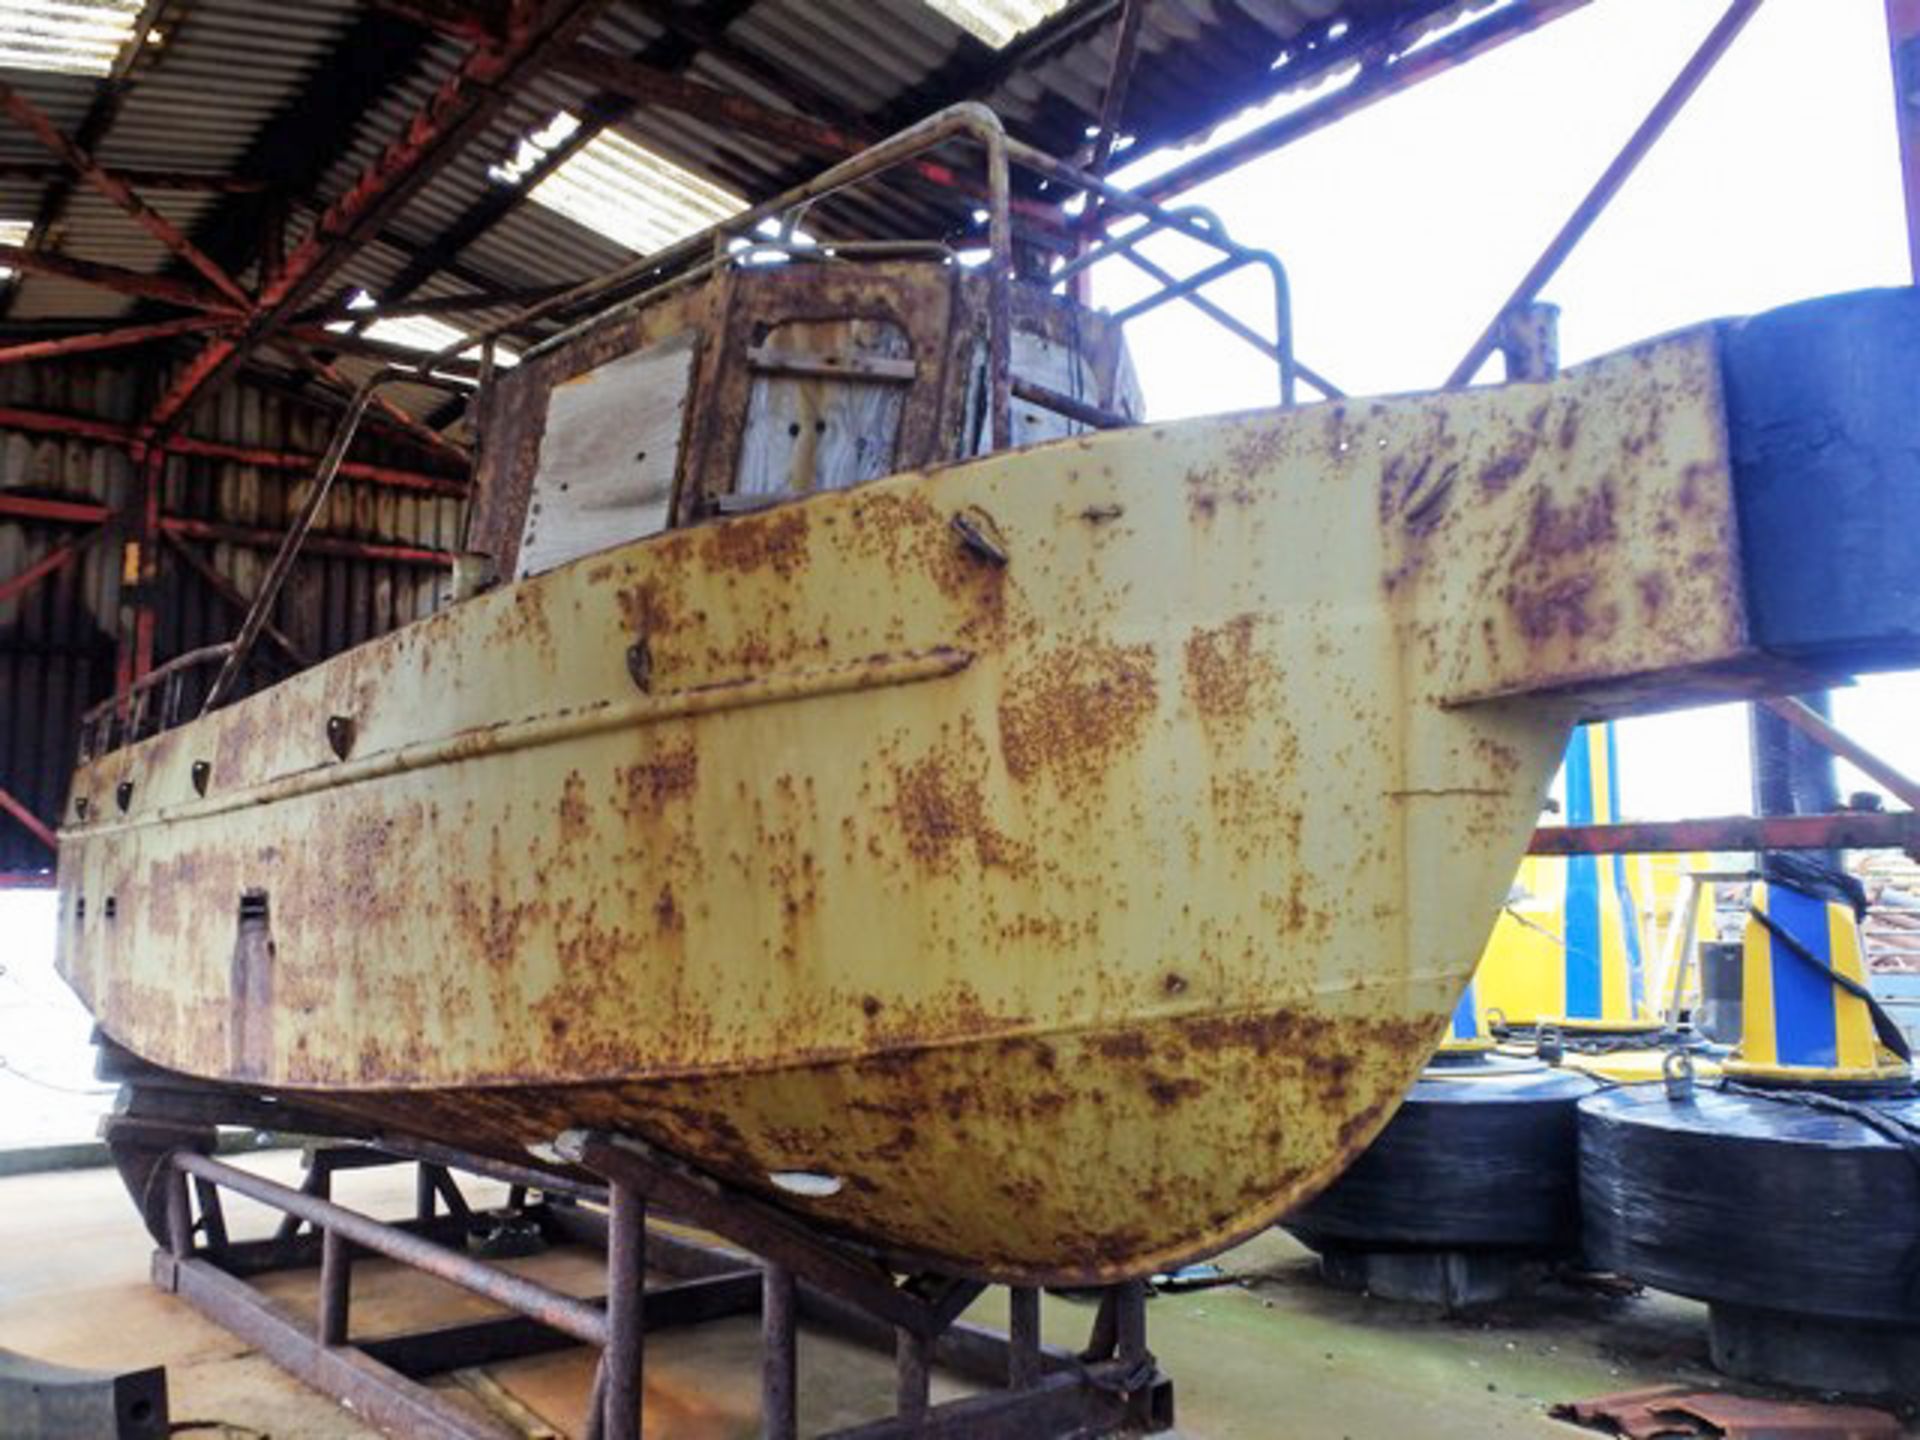 STEEL WORK BOAT, 4 CYL FORD ENGINE, L - 8.2M, W -2.8, H - 3.5M, NOT IN CERT (SOLD AS SEEN)** 10% BUY